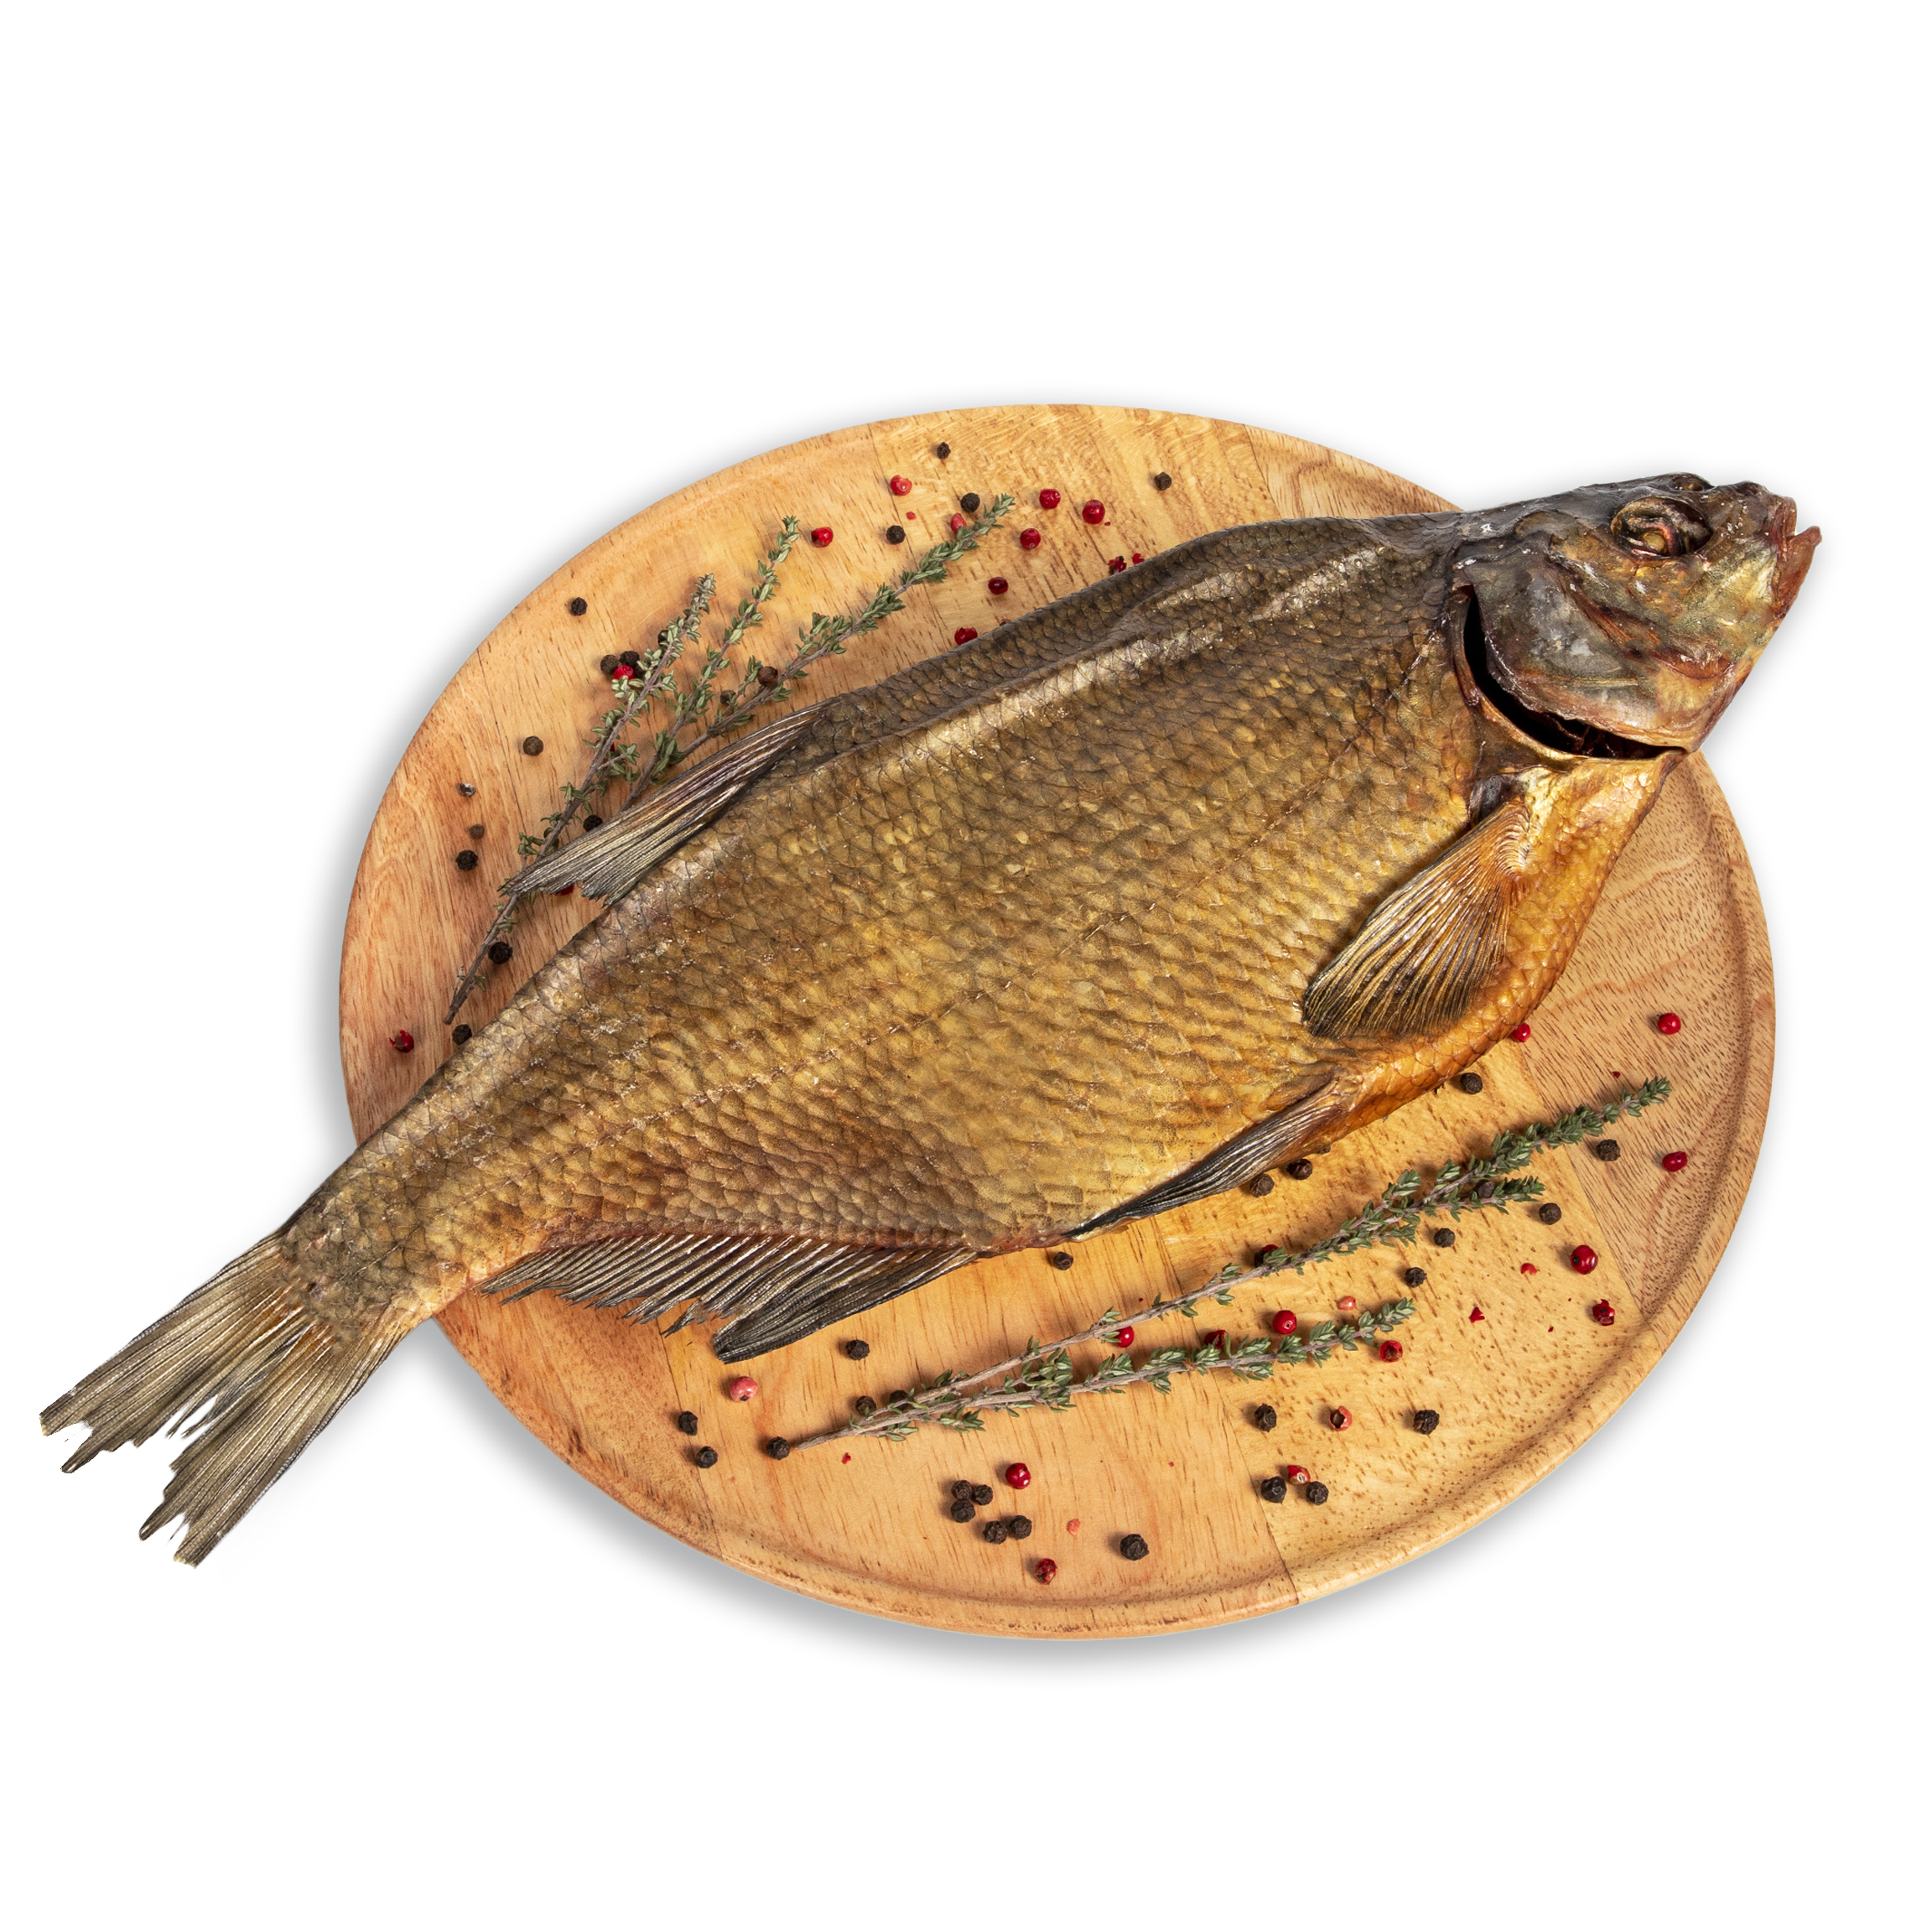 Cold-smoked bream